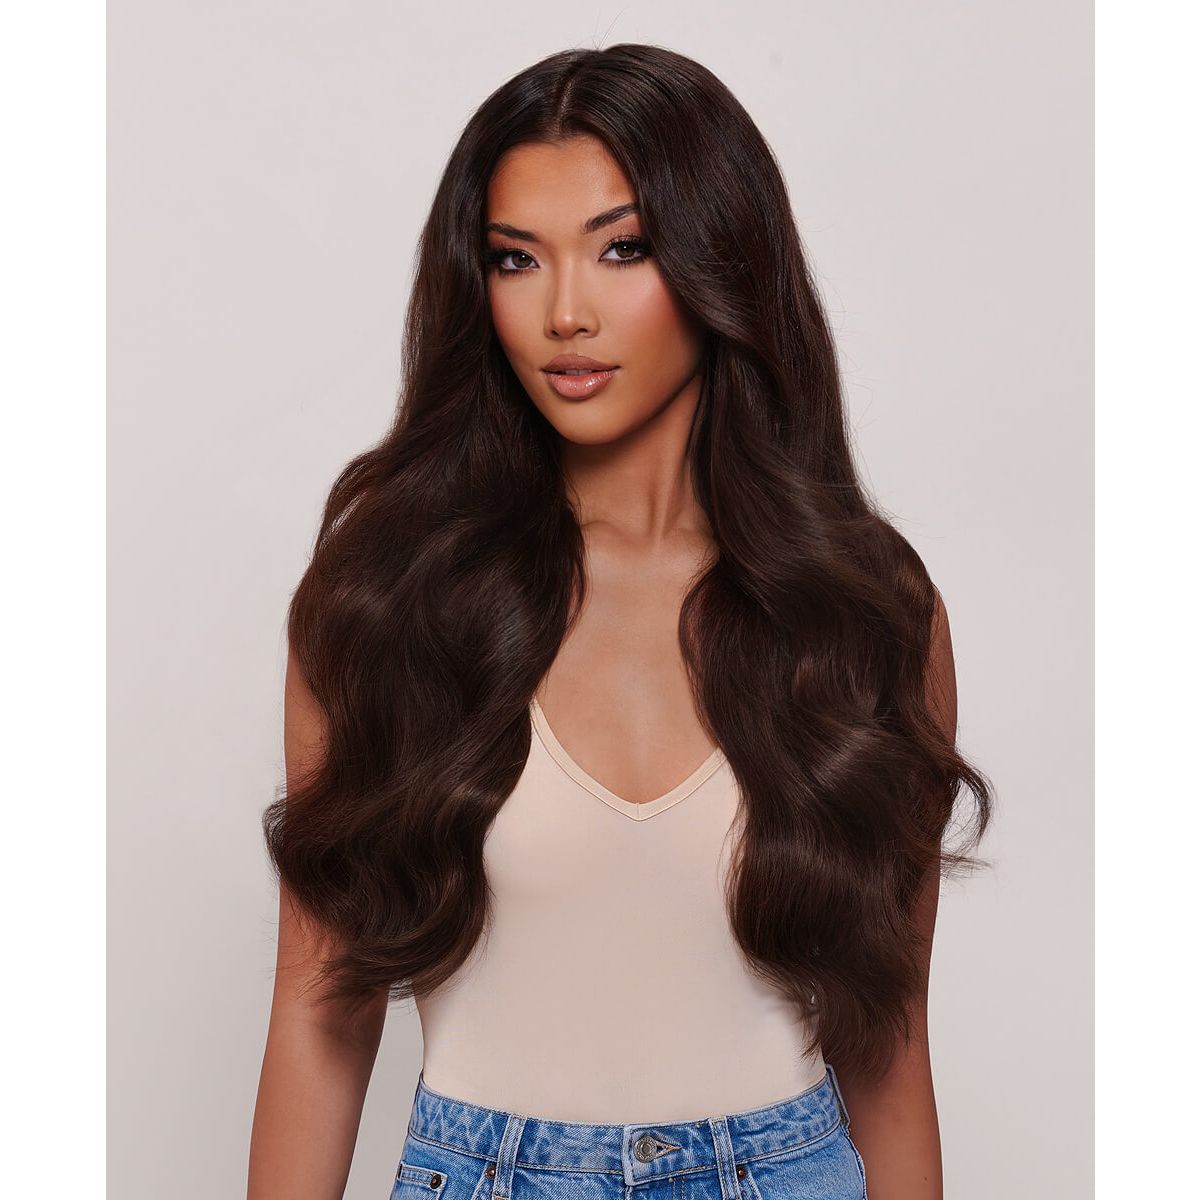 22 Ultra Seam, 235g Clip-in Hair Extensions